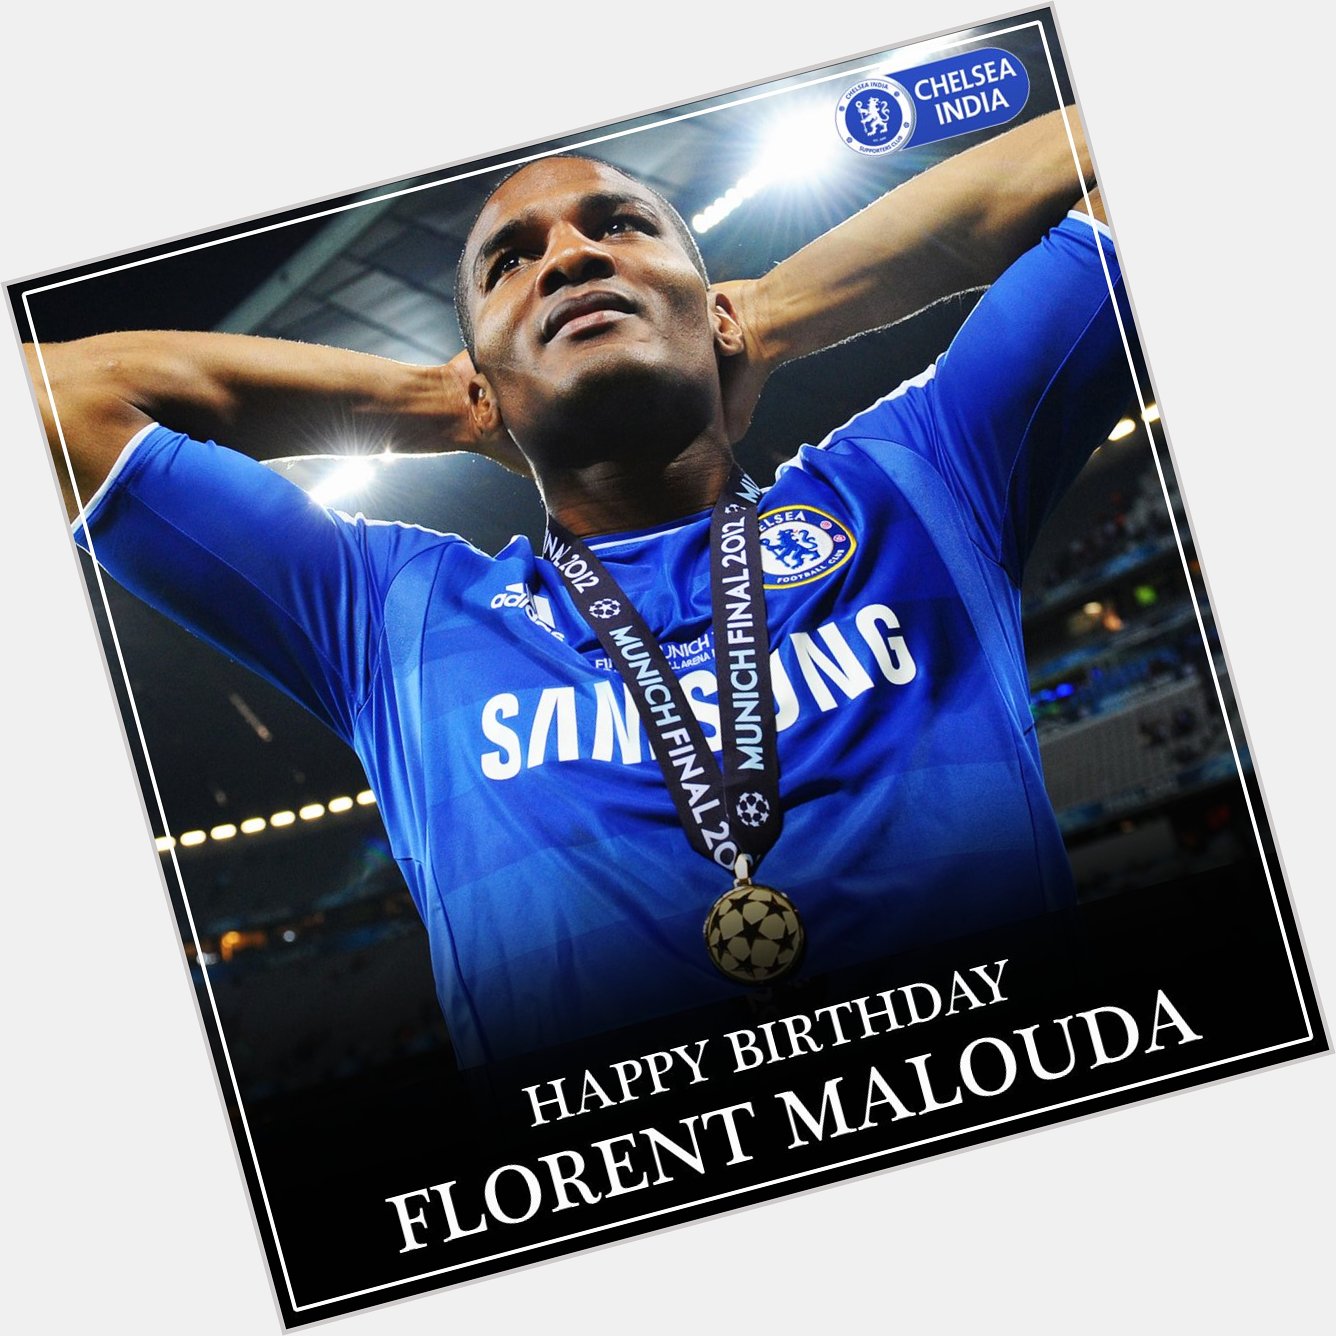 Happy birthday to our Champions League winner - Florent Malouda who turns 39 today! 